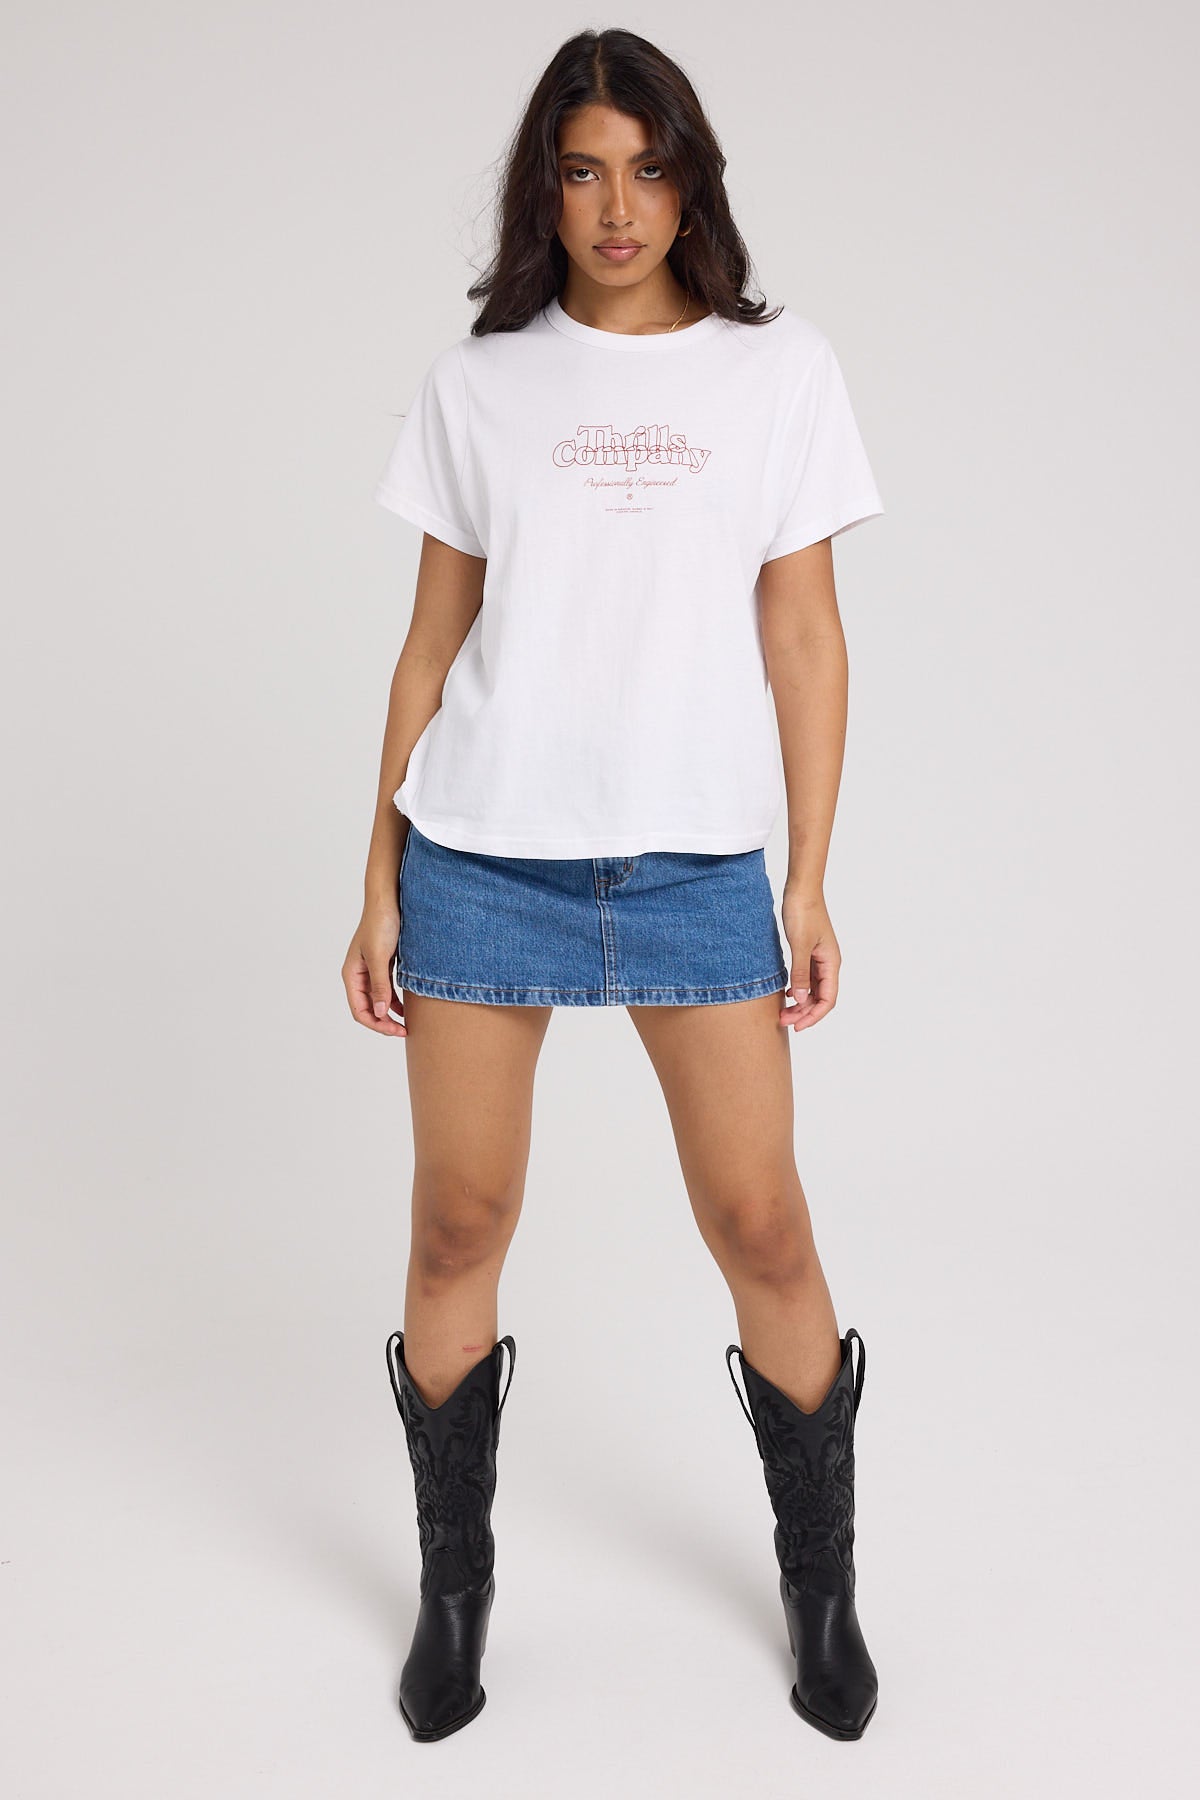 Thrills Experienced Relax Tee White